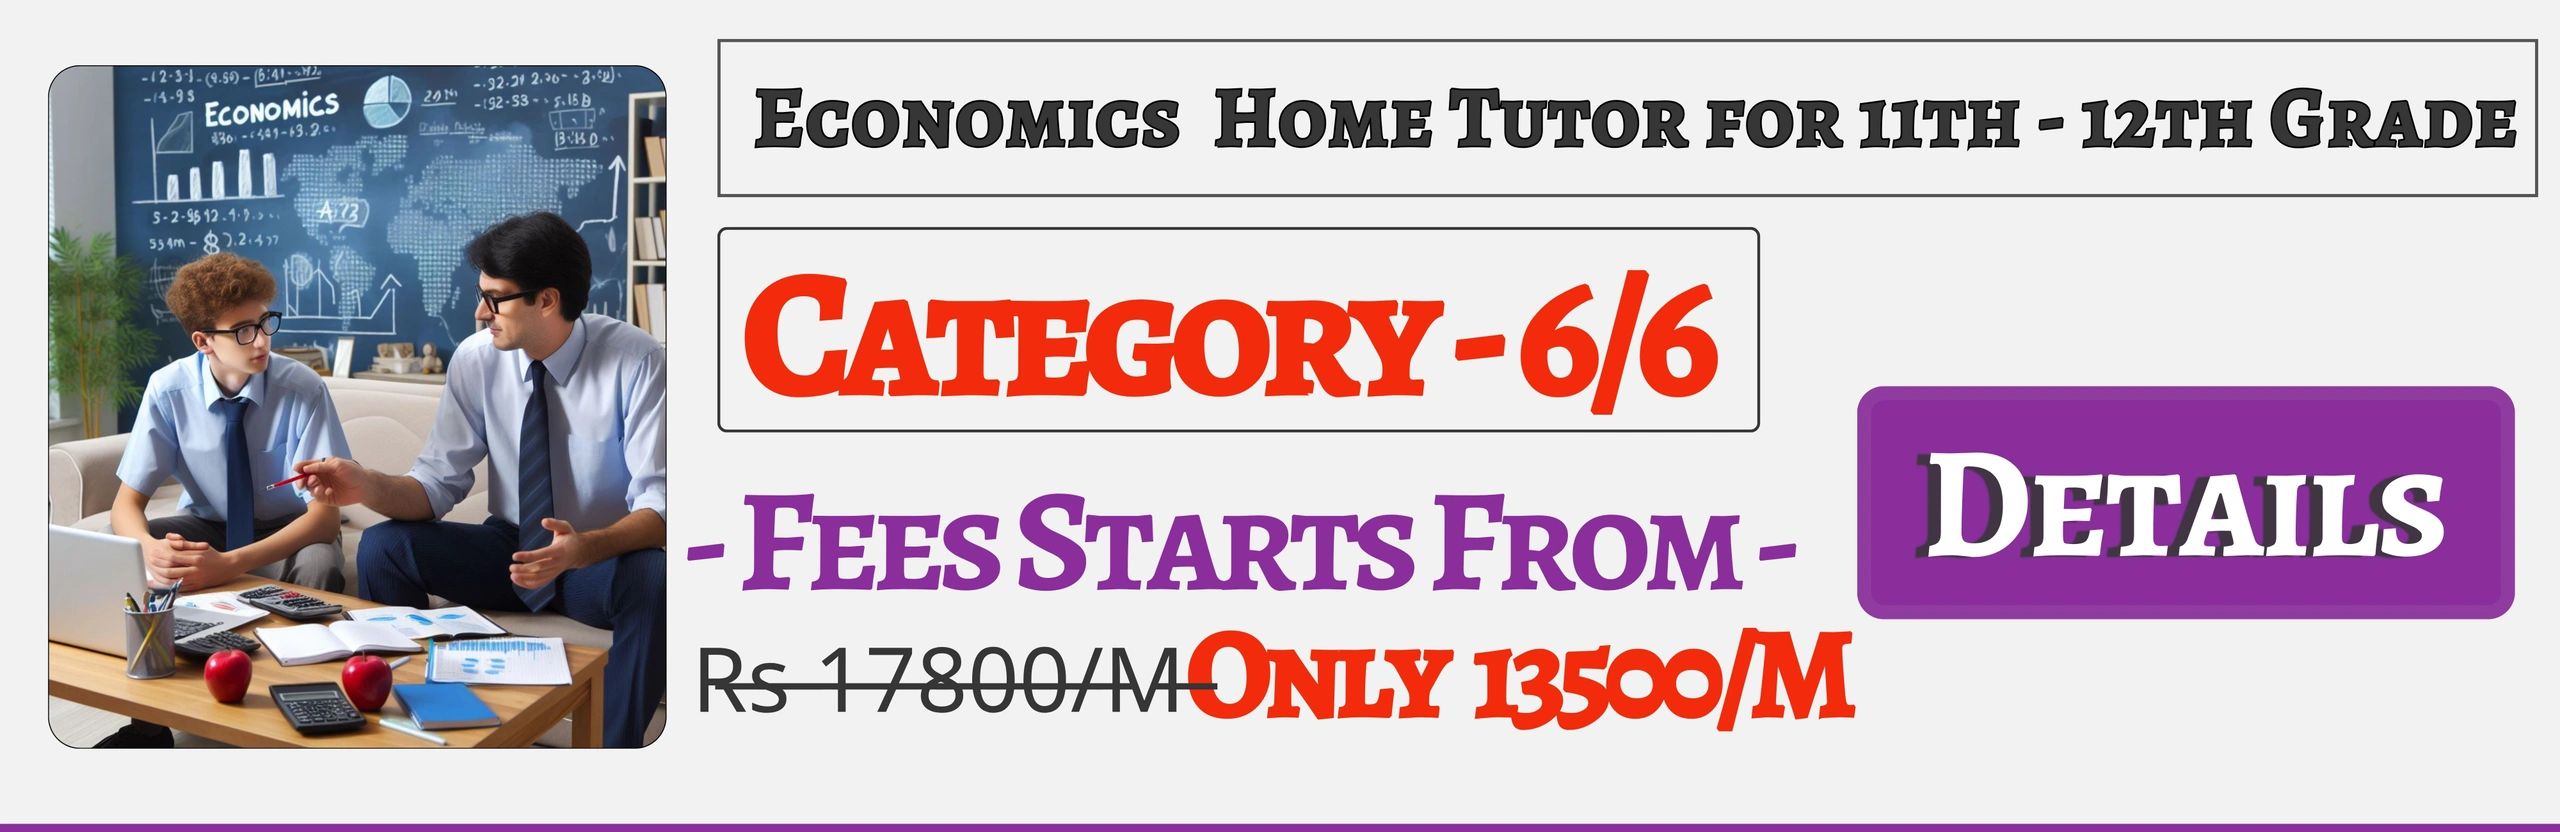 Book Best Nearby Economics Home Tuition Tutors For 11th & 12th Jaipur ,Fees Only 13500/M